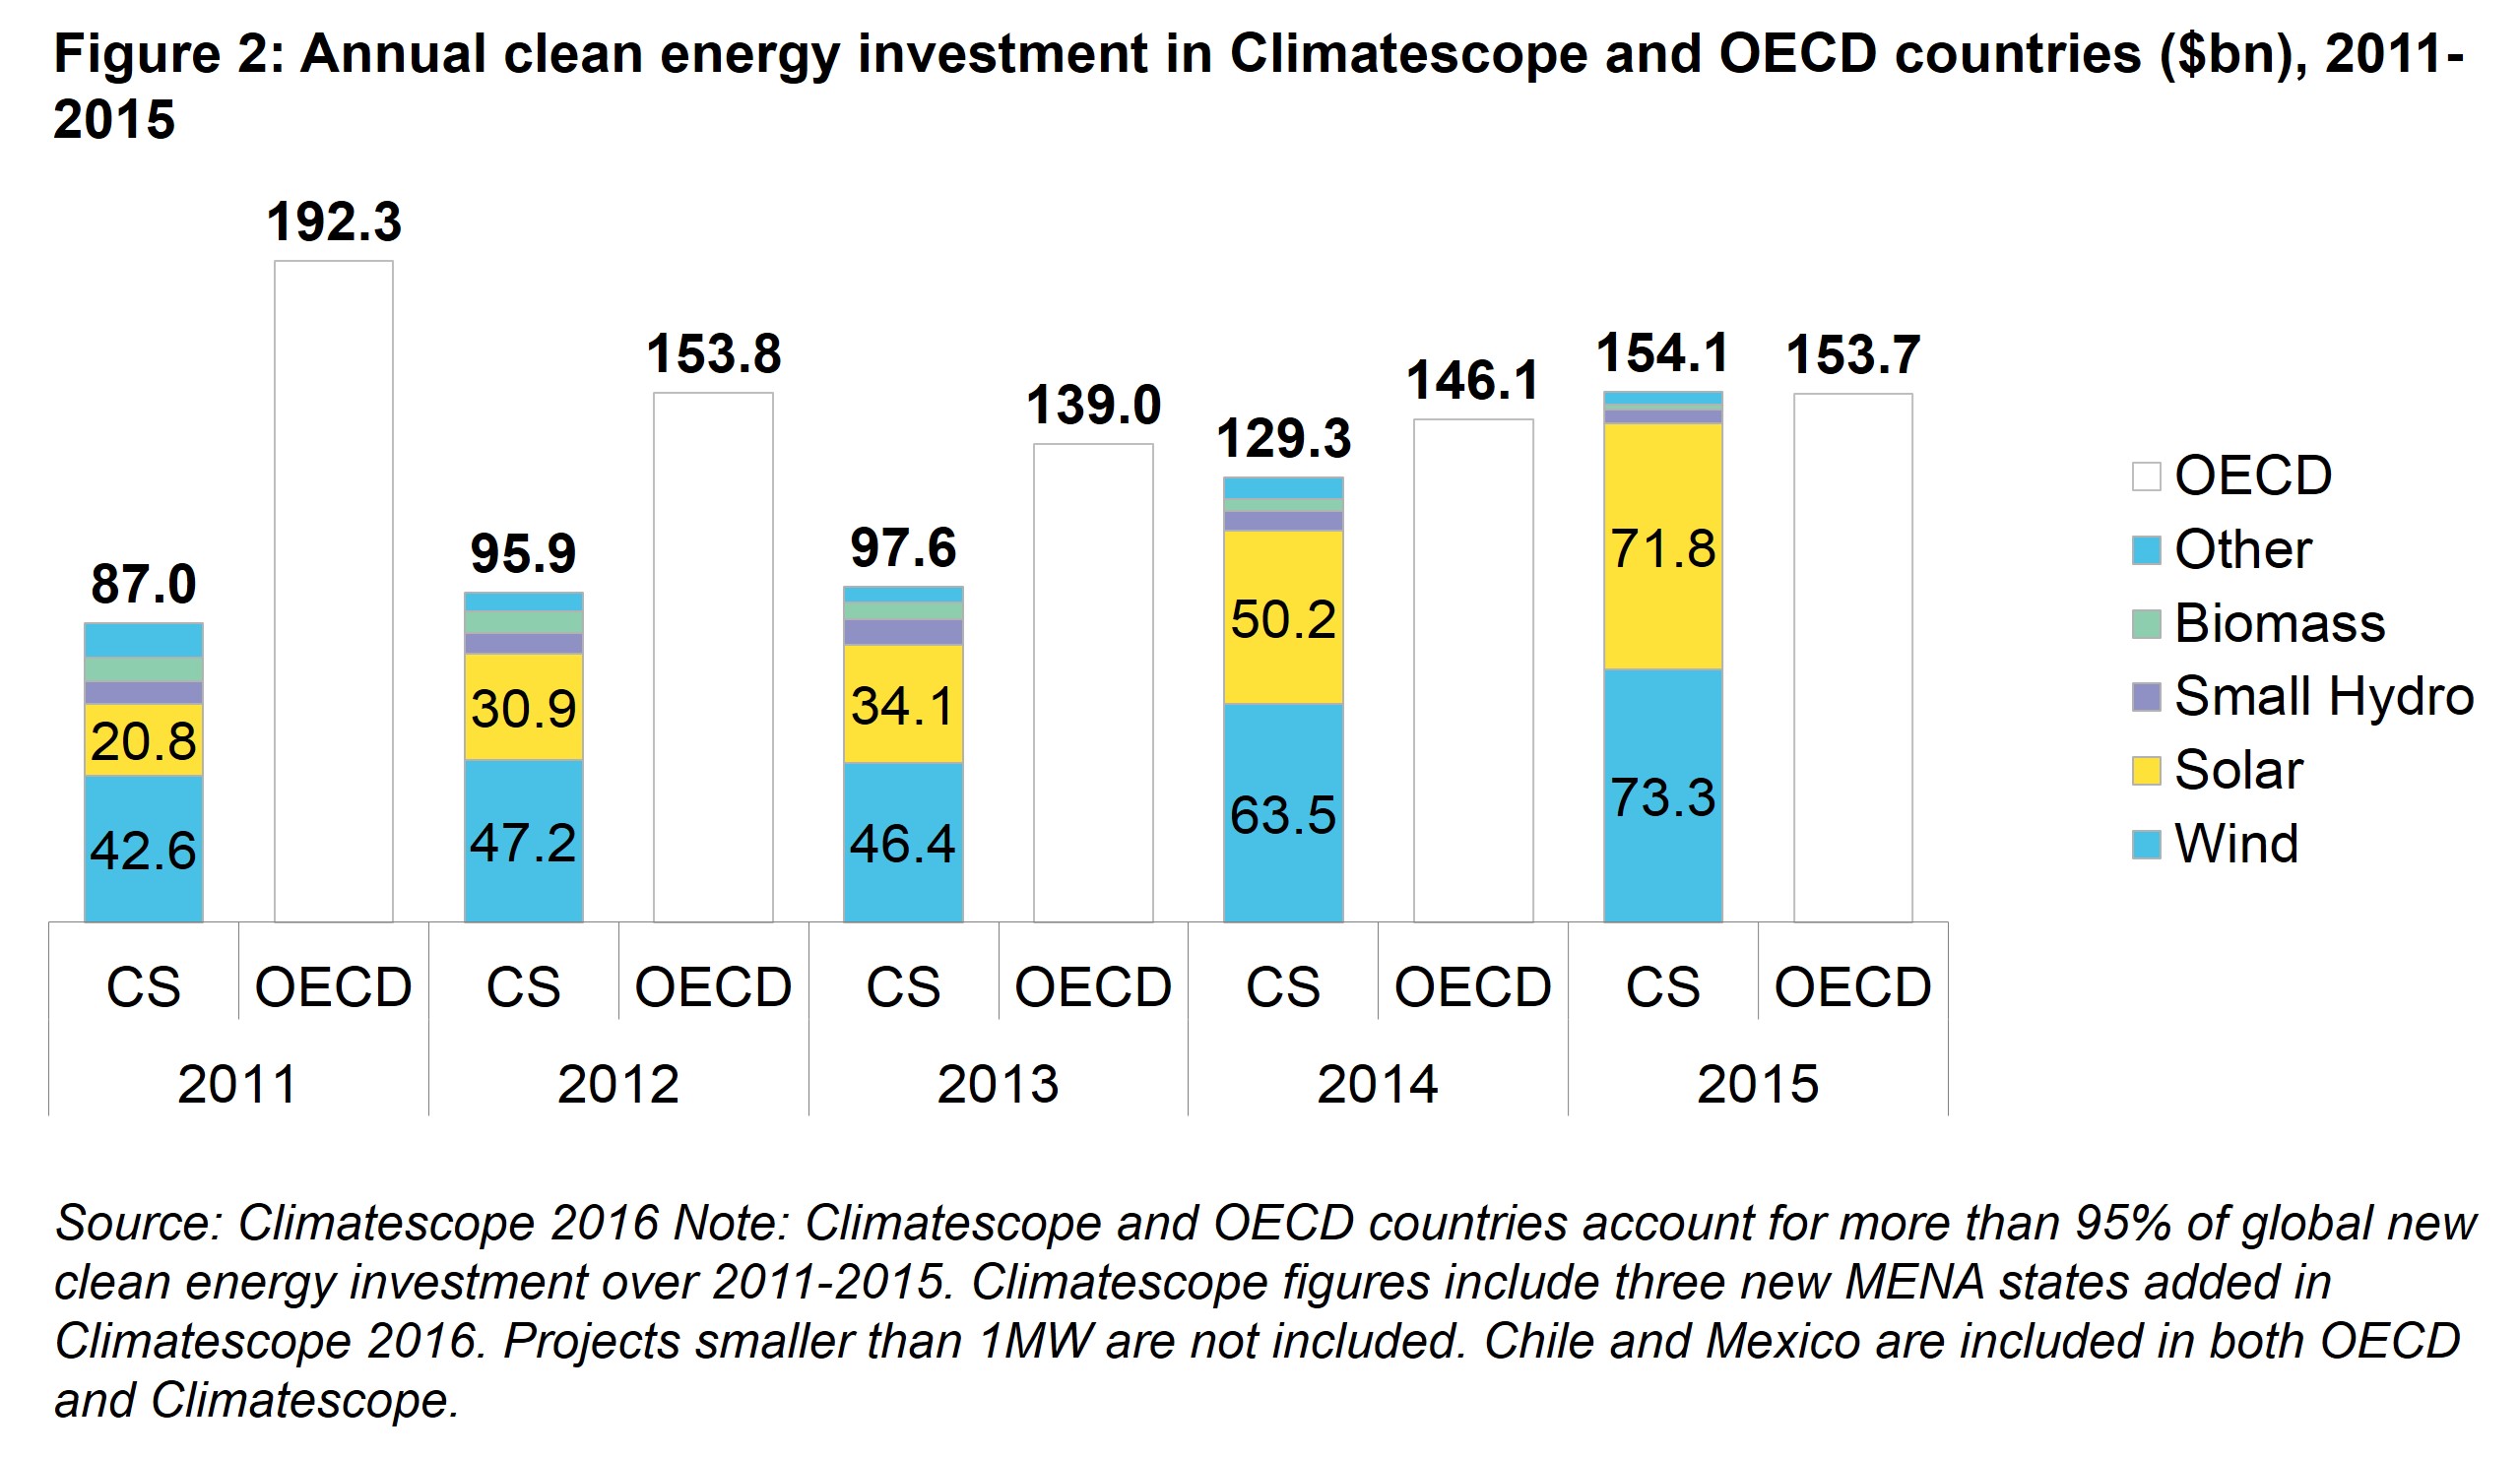 Executive Summary Fig 2 - Annual clean energy investment in Climatescope and OECD countries ($bn), 2011-2015